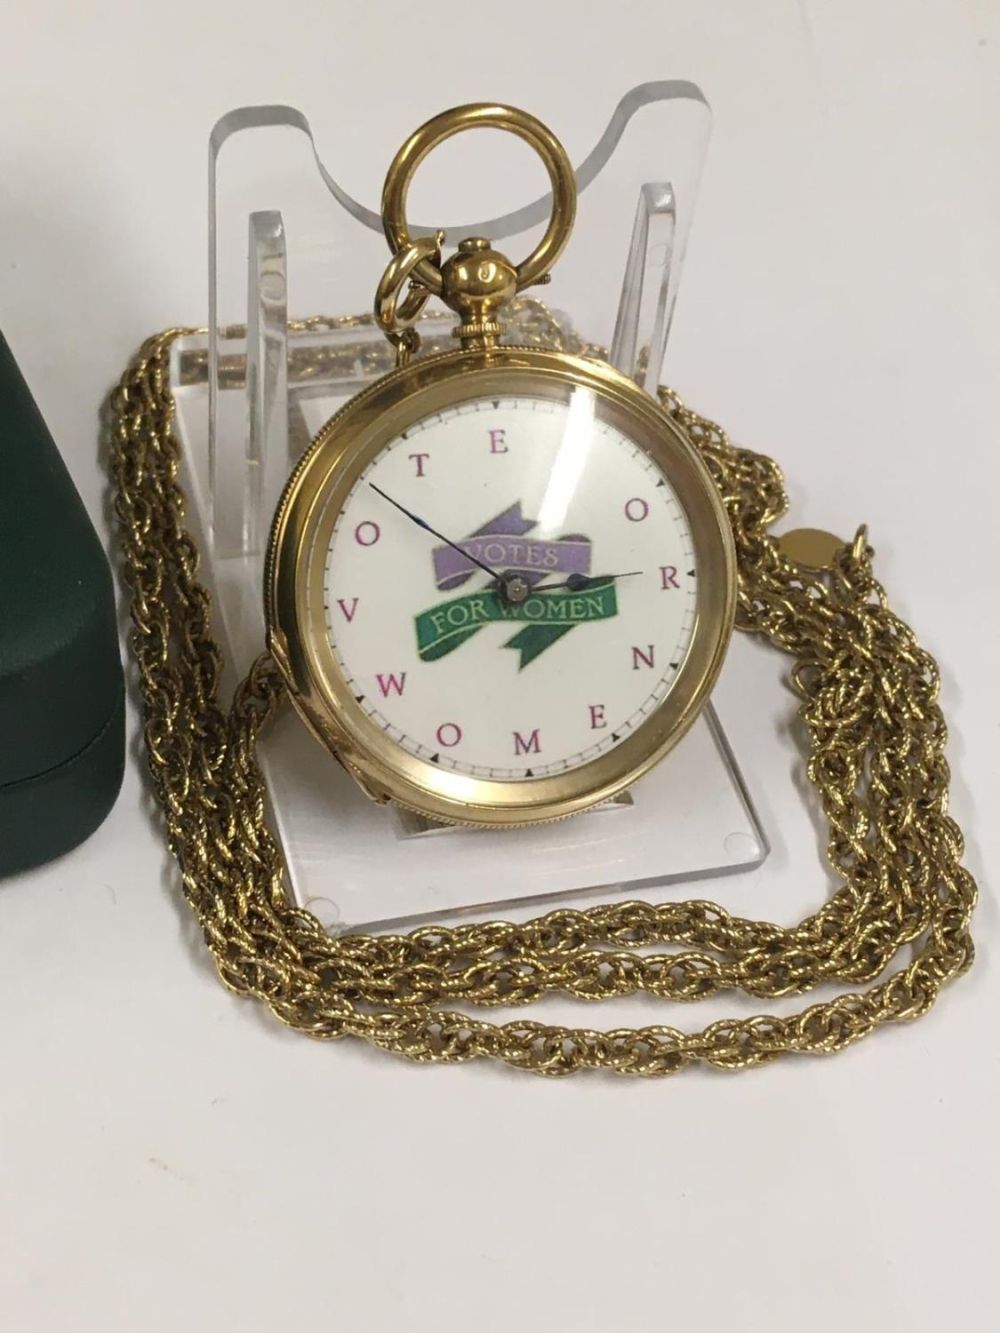 Antique Gilt Silver Suffragette Pocket Watch with box and chain unusual hallmark, case 41mm diameter - Image 5 of 8